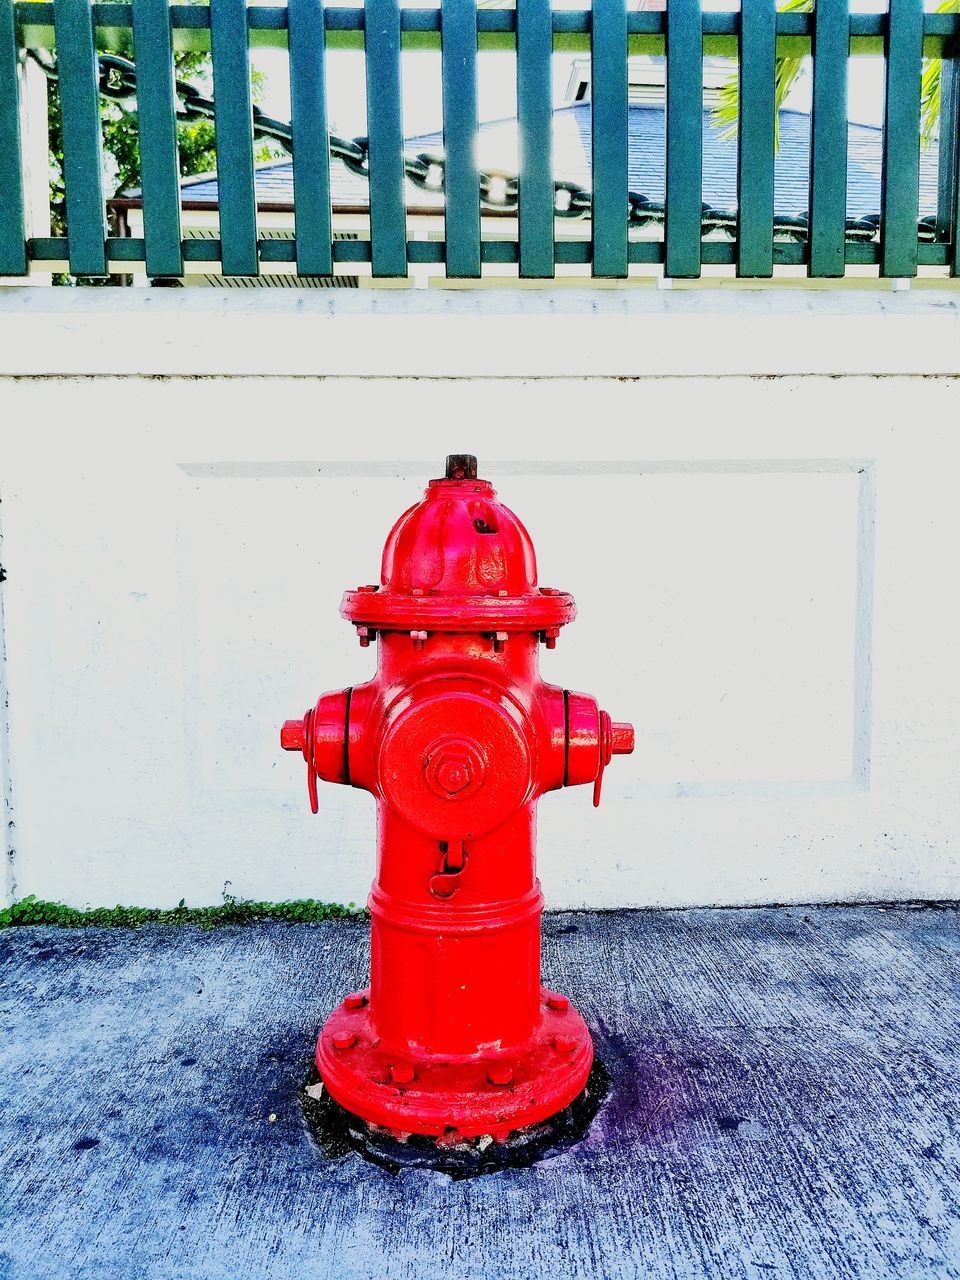 RED FIRE HYDRANT ON FOOTPATH BY WALL